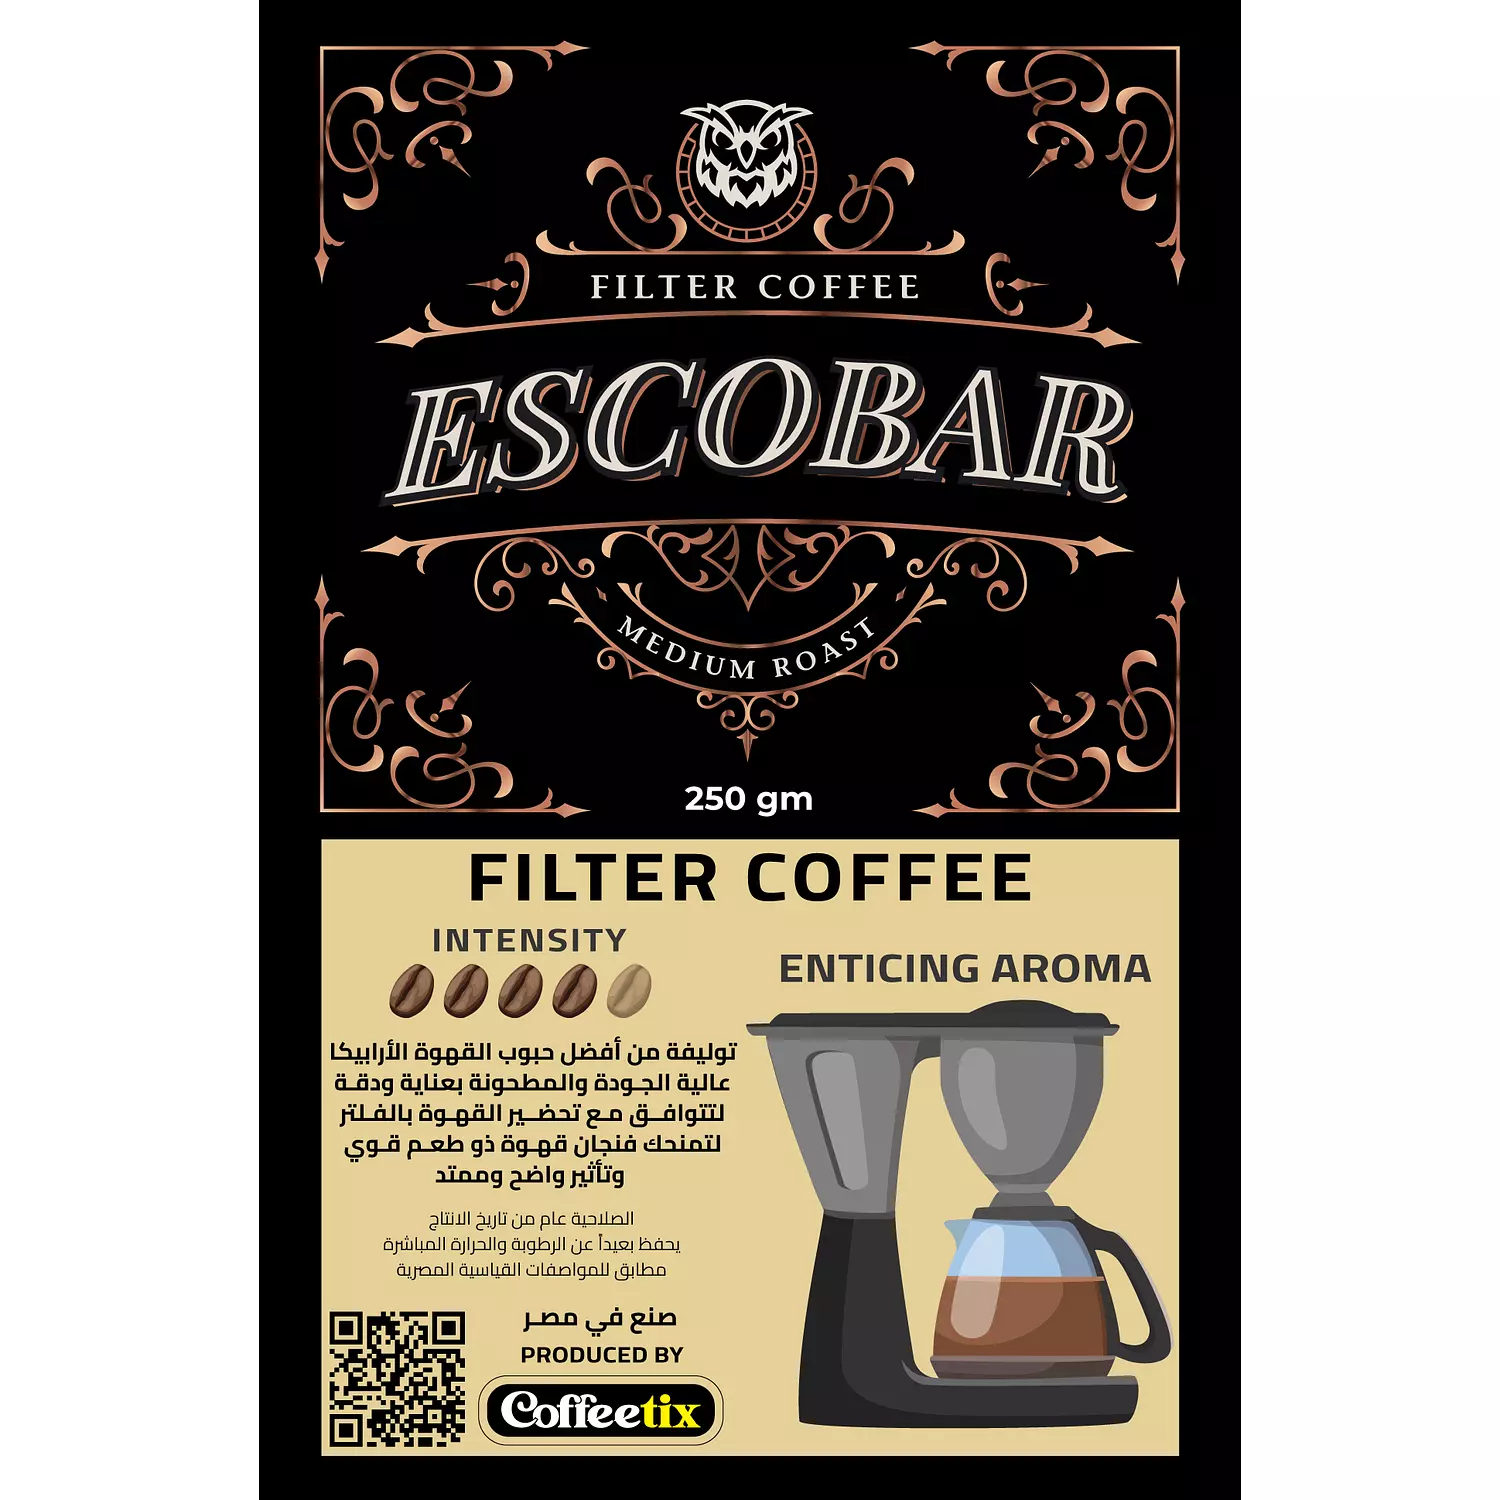 Espresso coffee is intended for preparing filter coffee hover image